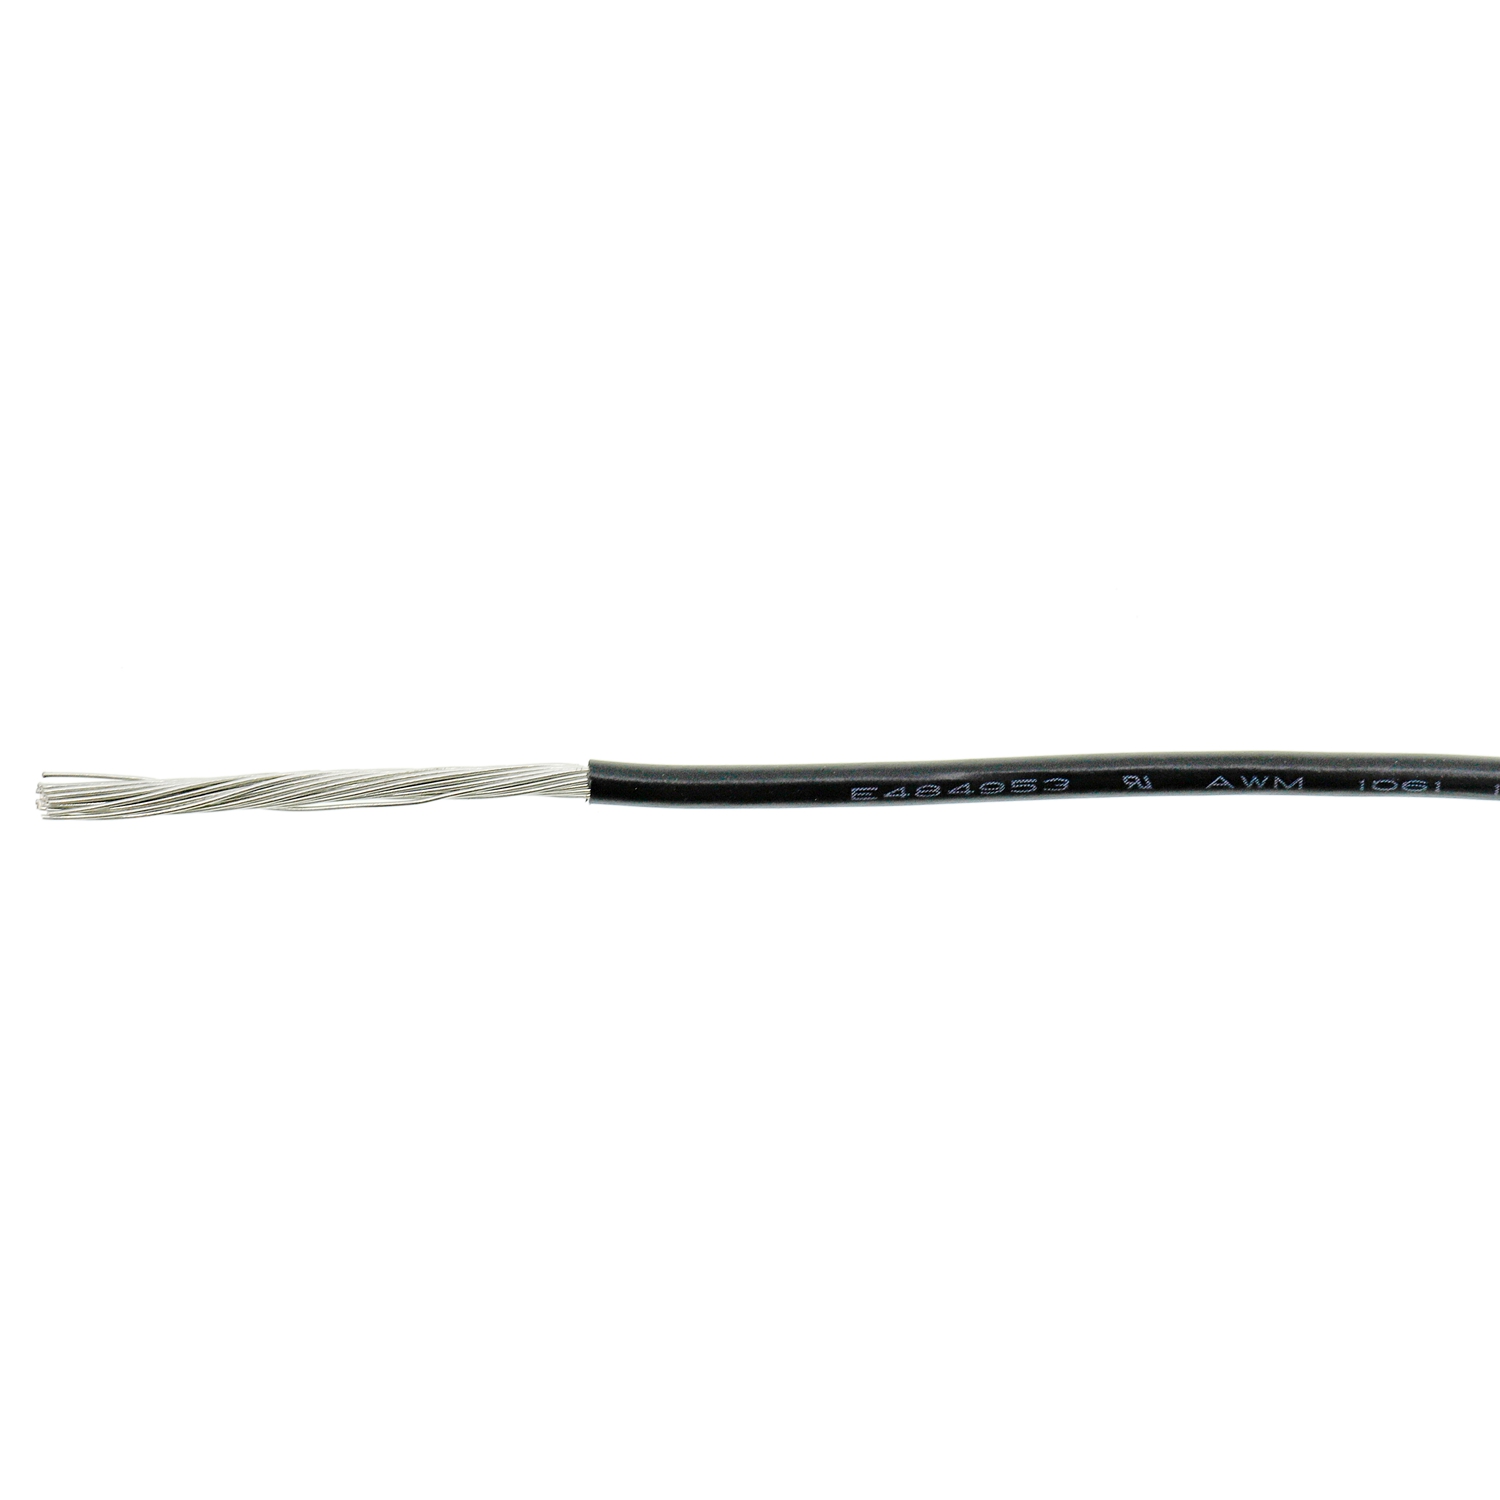 UL1061 SRPVC 80℃ 300V Hookup Wire for Electronics Connection 